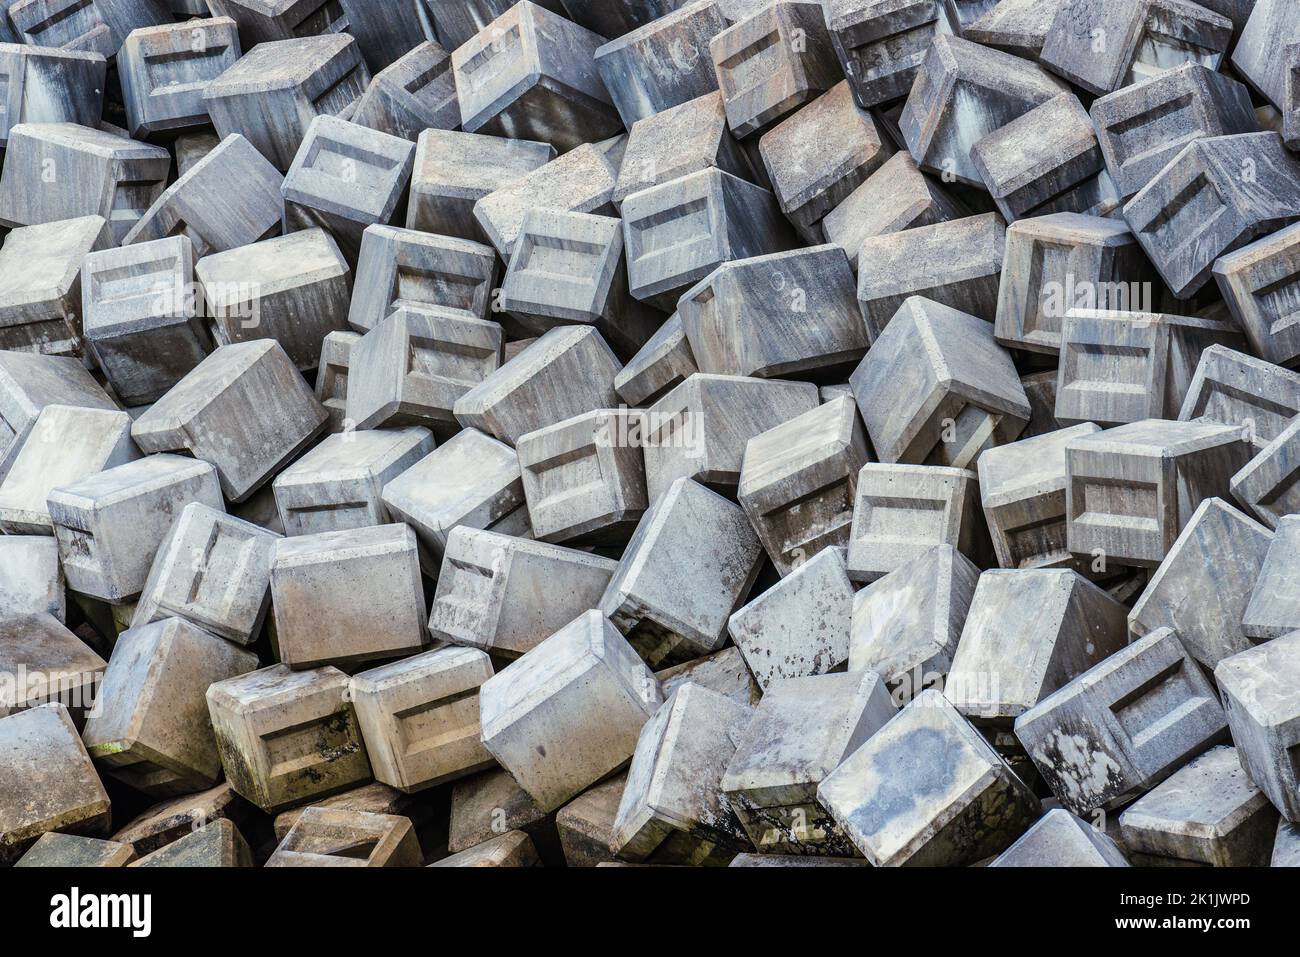 Concrete blocks piled form a breakwater and cover the entire frame Stock Photo